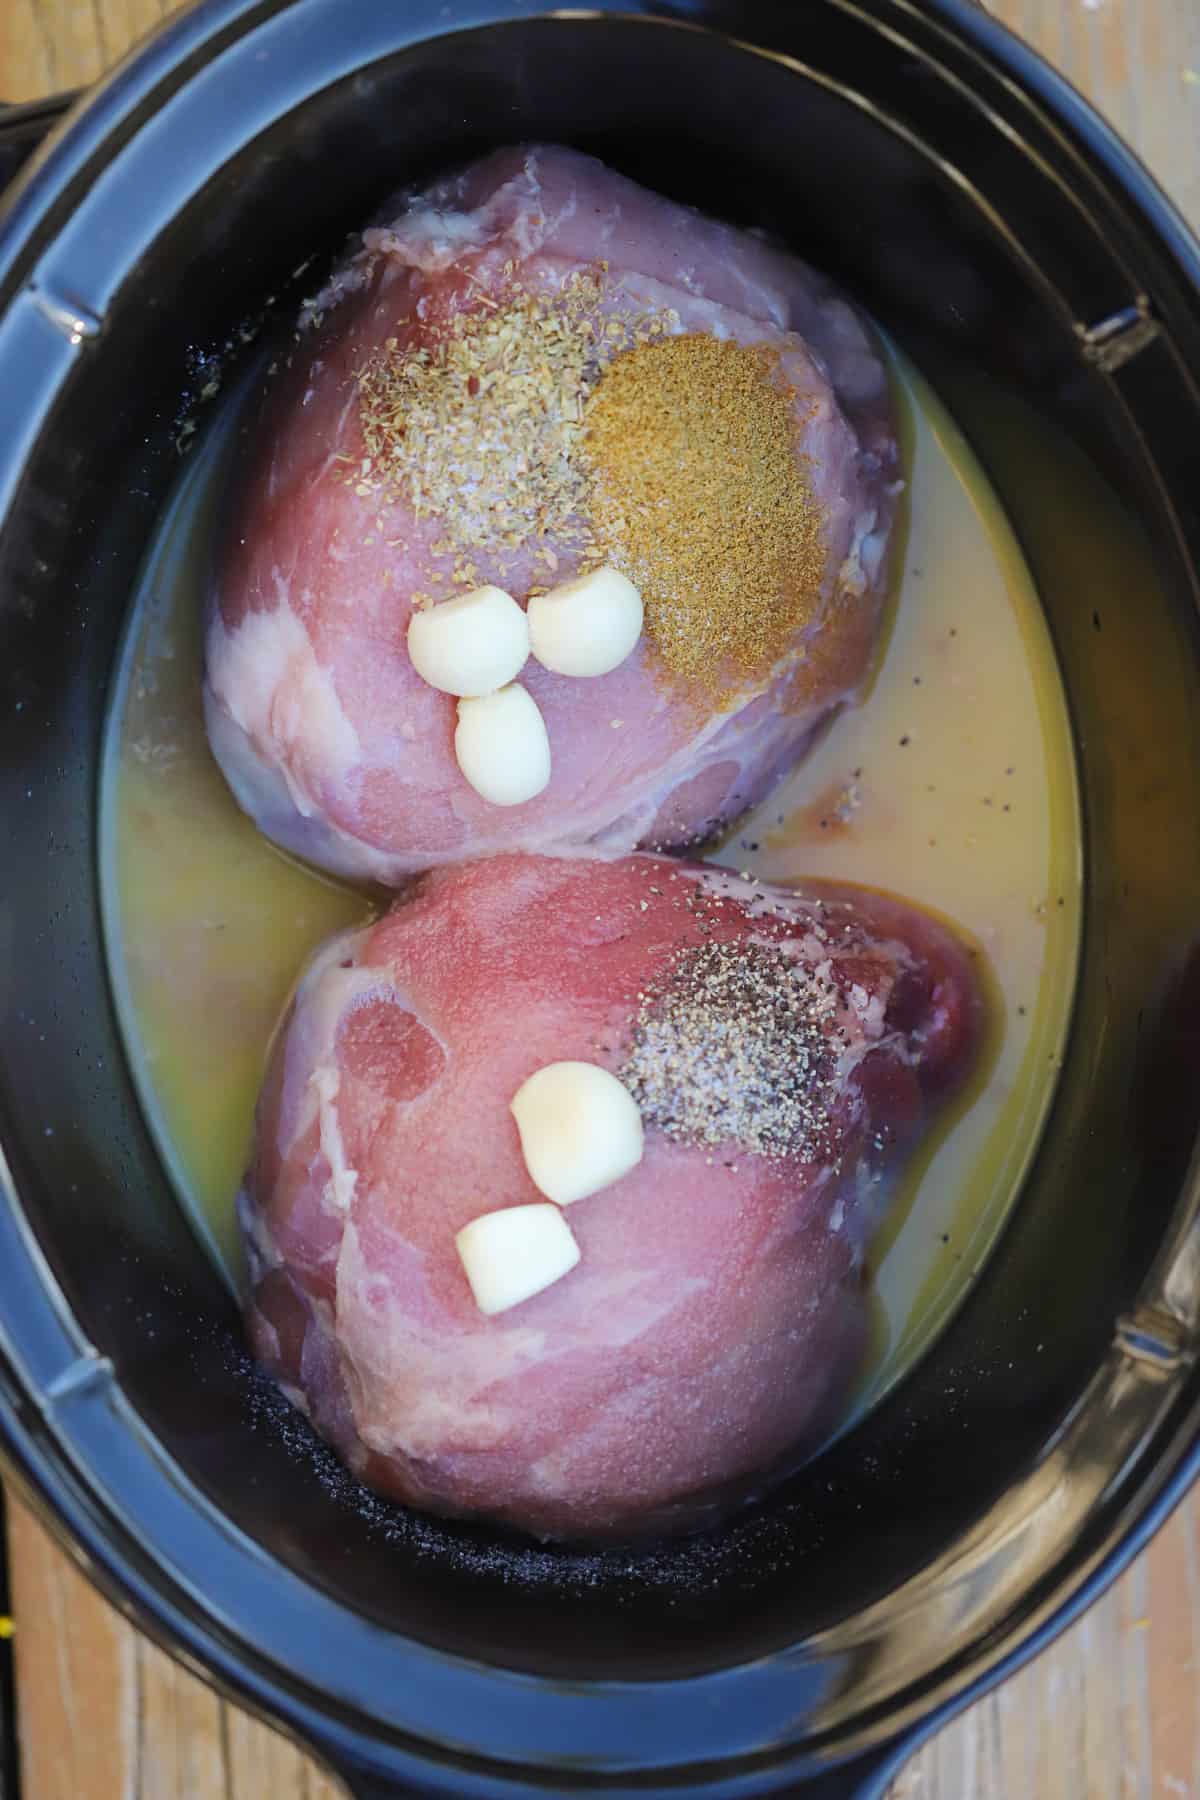 Pork roast in a slow cooker along with garlic, broth and spices.